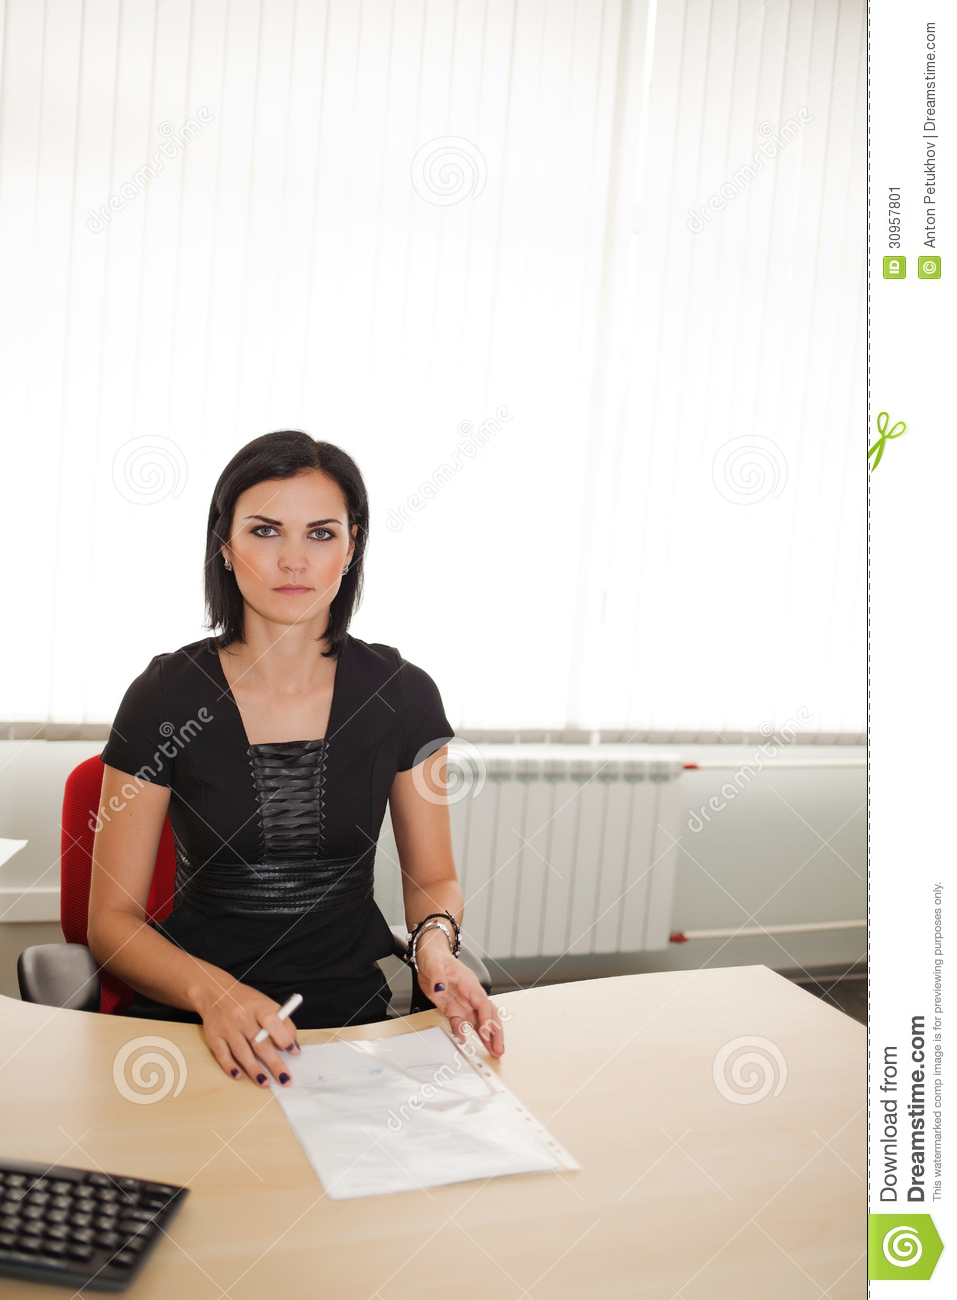 Female Office Worker Stock Image   Image  30957801